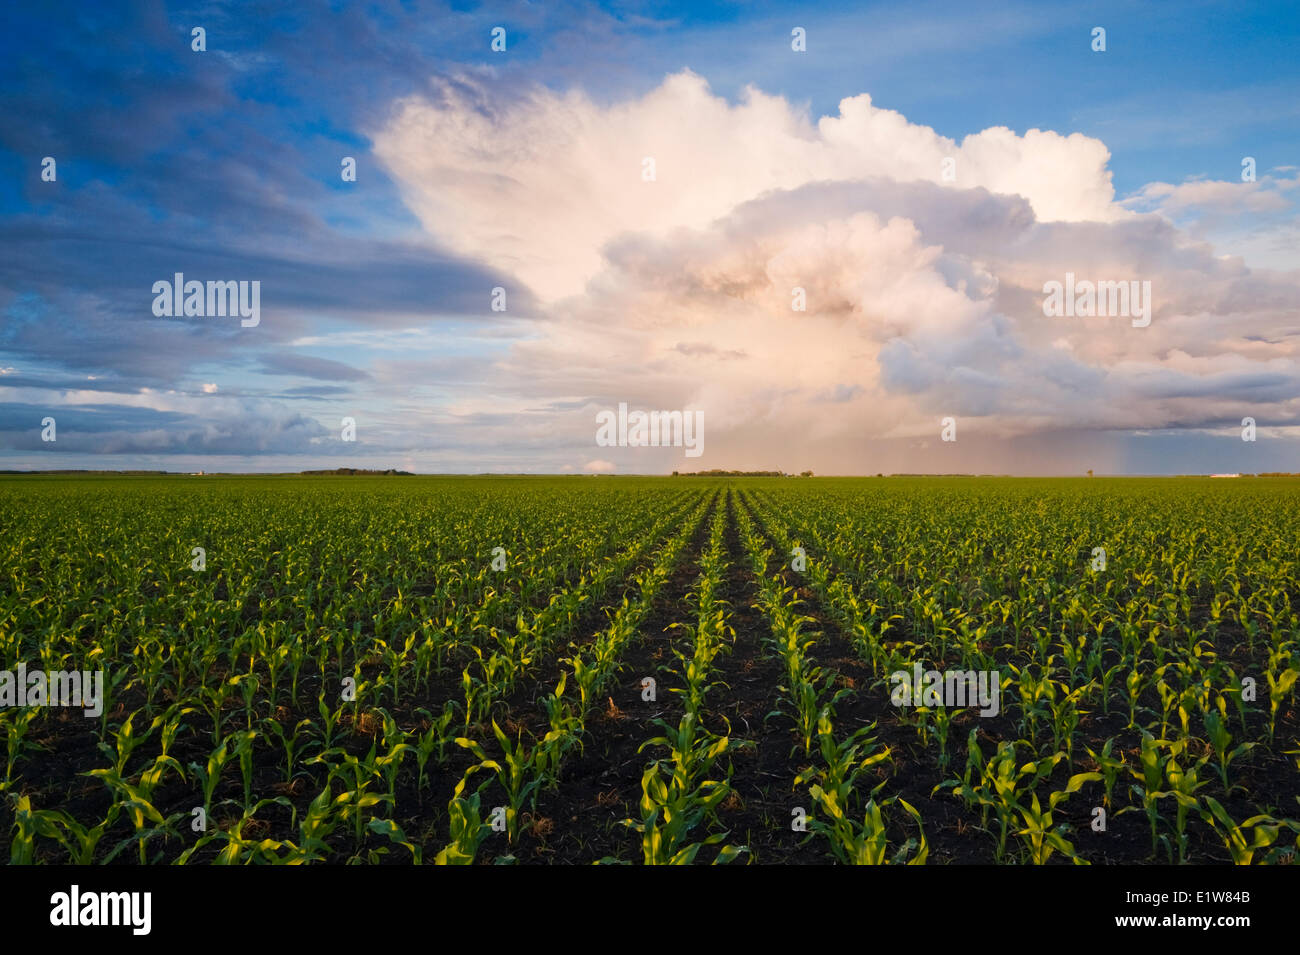 Field early growth feed/grain corn sky containing a cumulonimbus cloud buildup in the background near Dufresne Manitoba Canada Stock Photo